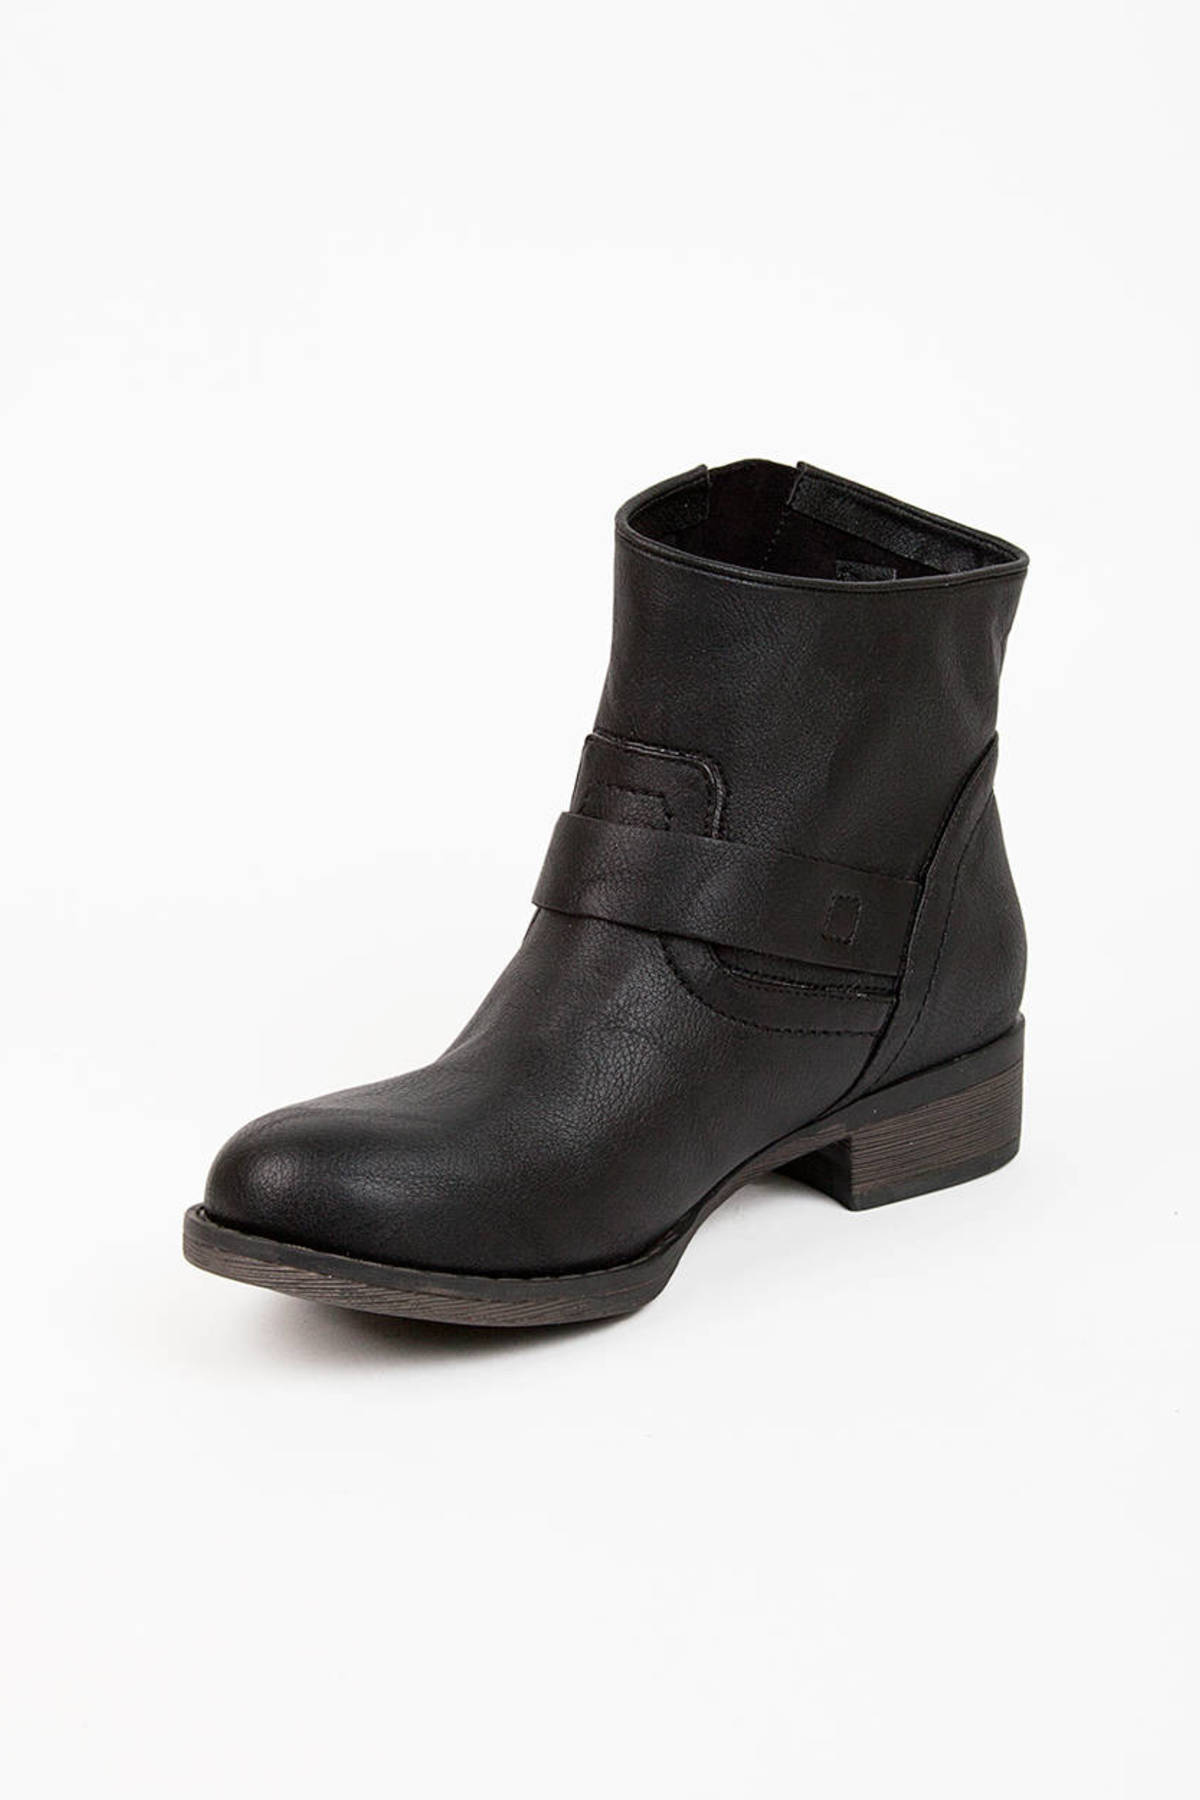 Juliee Ankle Boots in Black - $69 | Tobi US